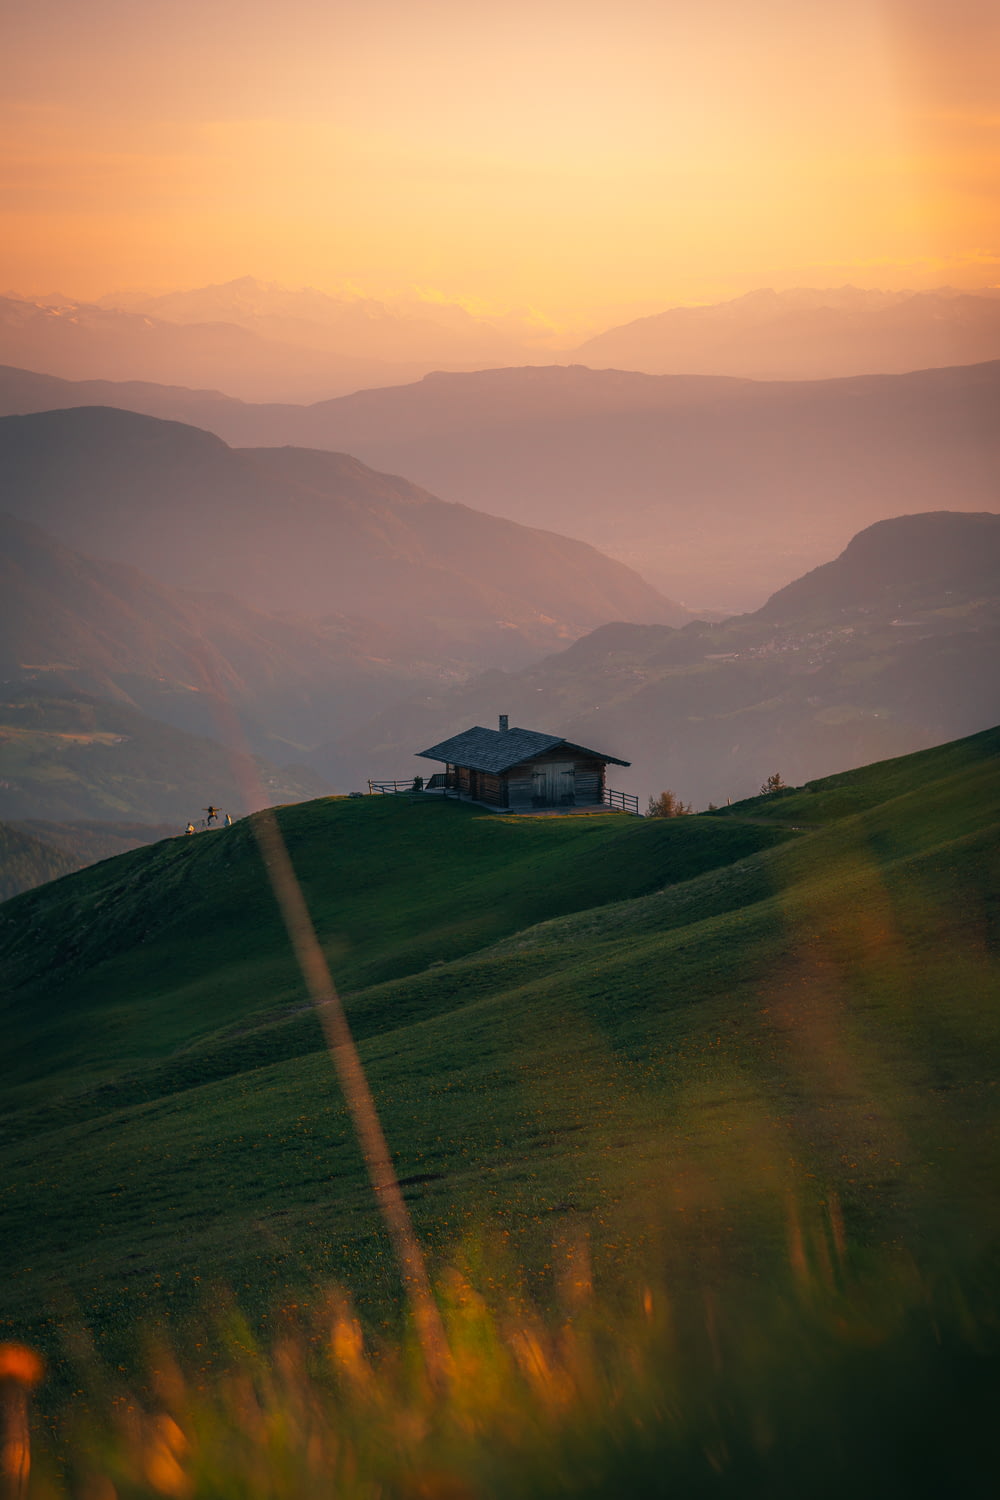 a house on top of a hill with mountains in the background